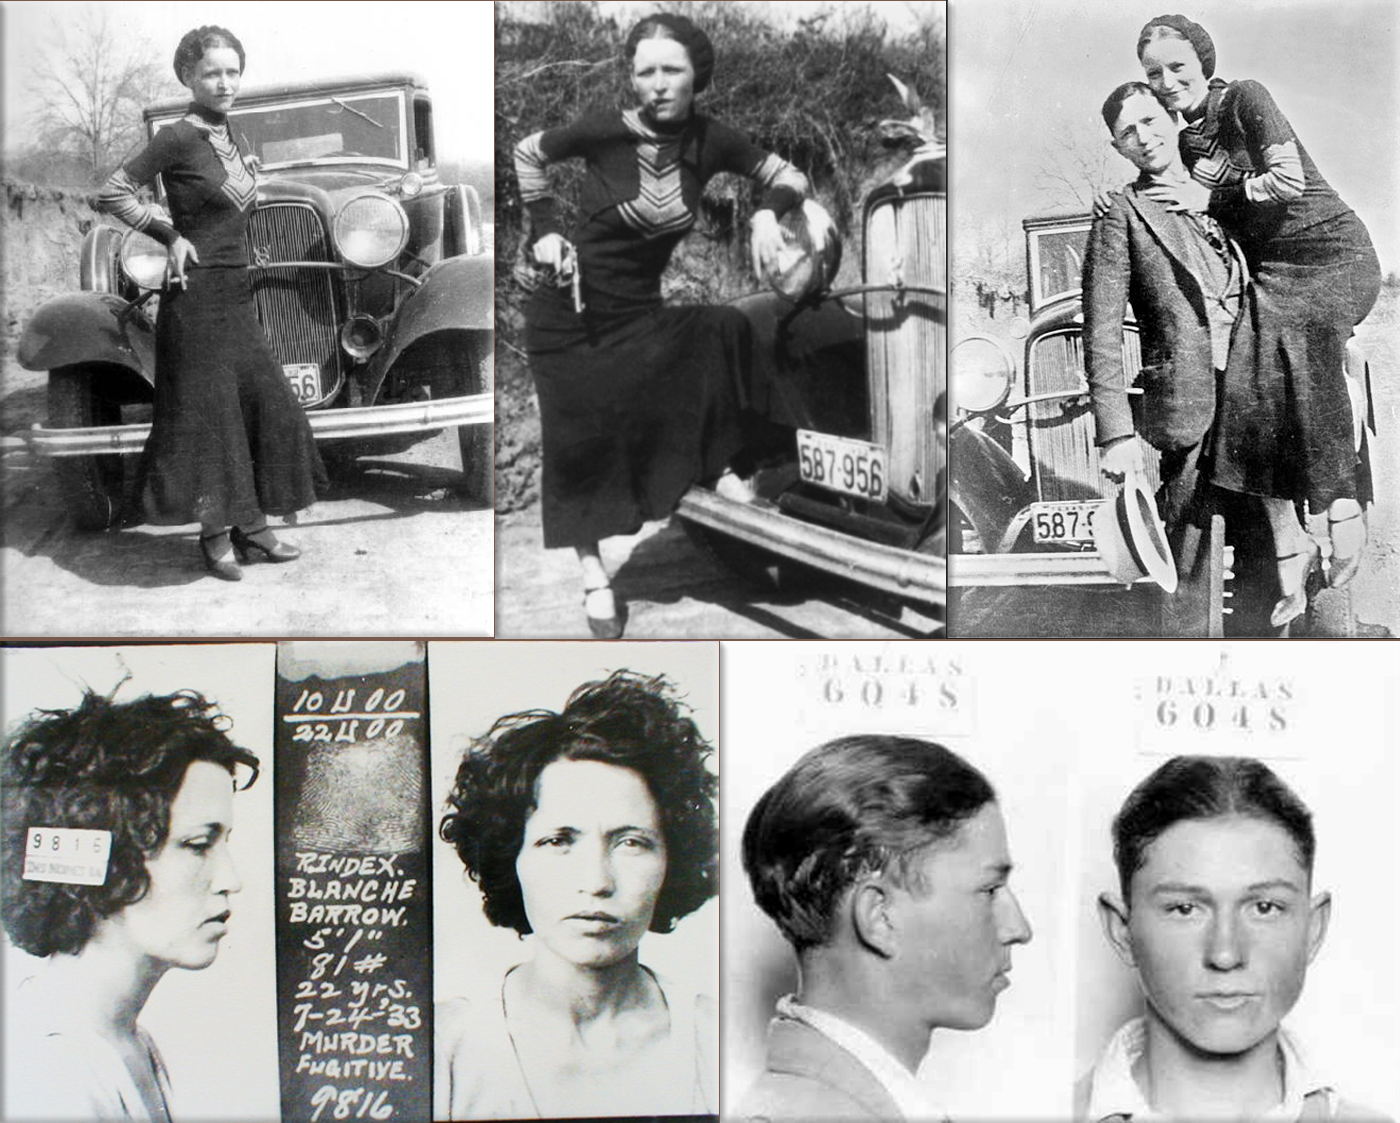 American bank robbers Bonnie and Clyde: ● Parker with 1932 Ford V-8 B-400 convertible sedan. Captured Joplin film ● Bonnie and Clyde in March 1933, in a photo found by police at the Joplin, Missouri hideout ● Blanche spent the rest of the 1930s in prison for her four-month run with the gang; she weighed just 81 pounds when captured ● Clyde Barrow in 1926, aged 16.